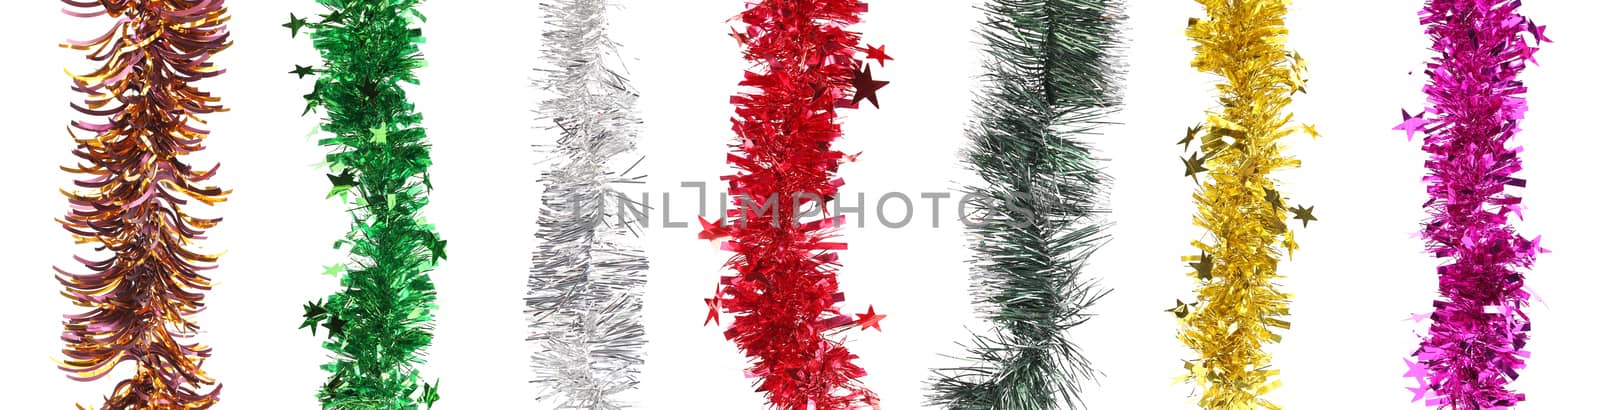 Christmas decoration in row. Isolated on a white background.